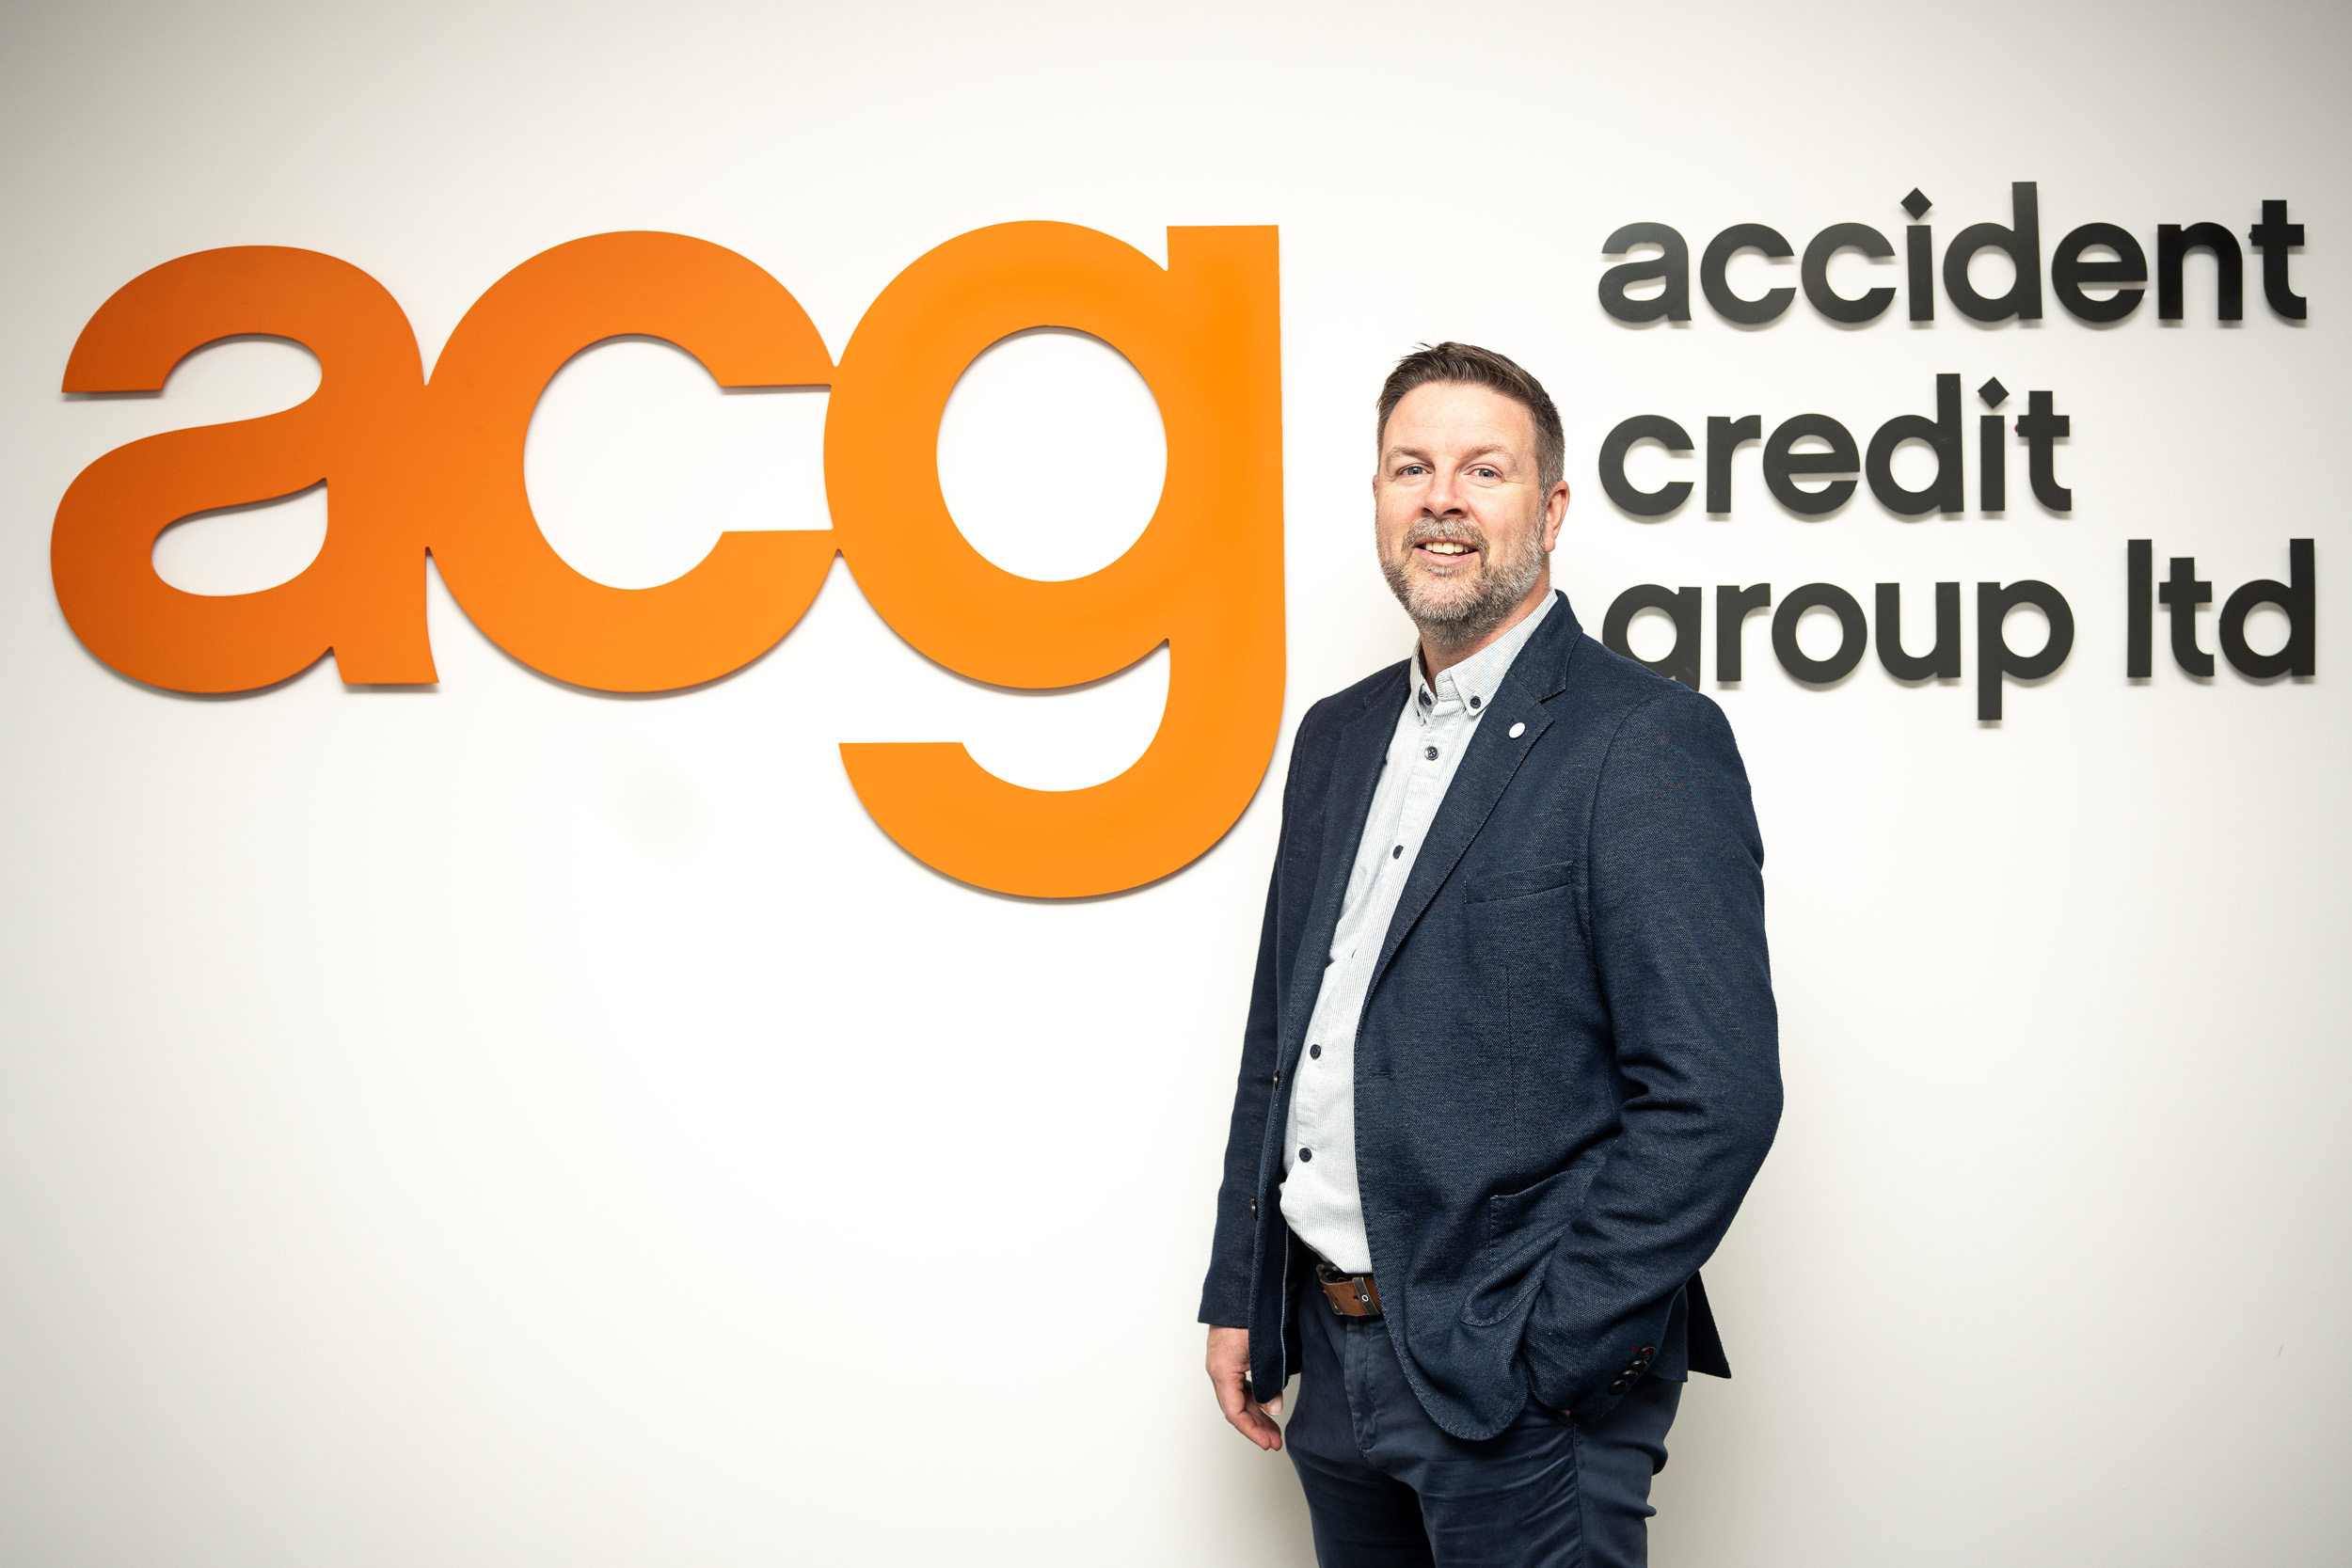 ACCIDENT CREDIT GROUP (ACG) LTD APPOINTS NEW MANAGING DIRECTOR